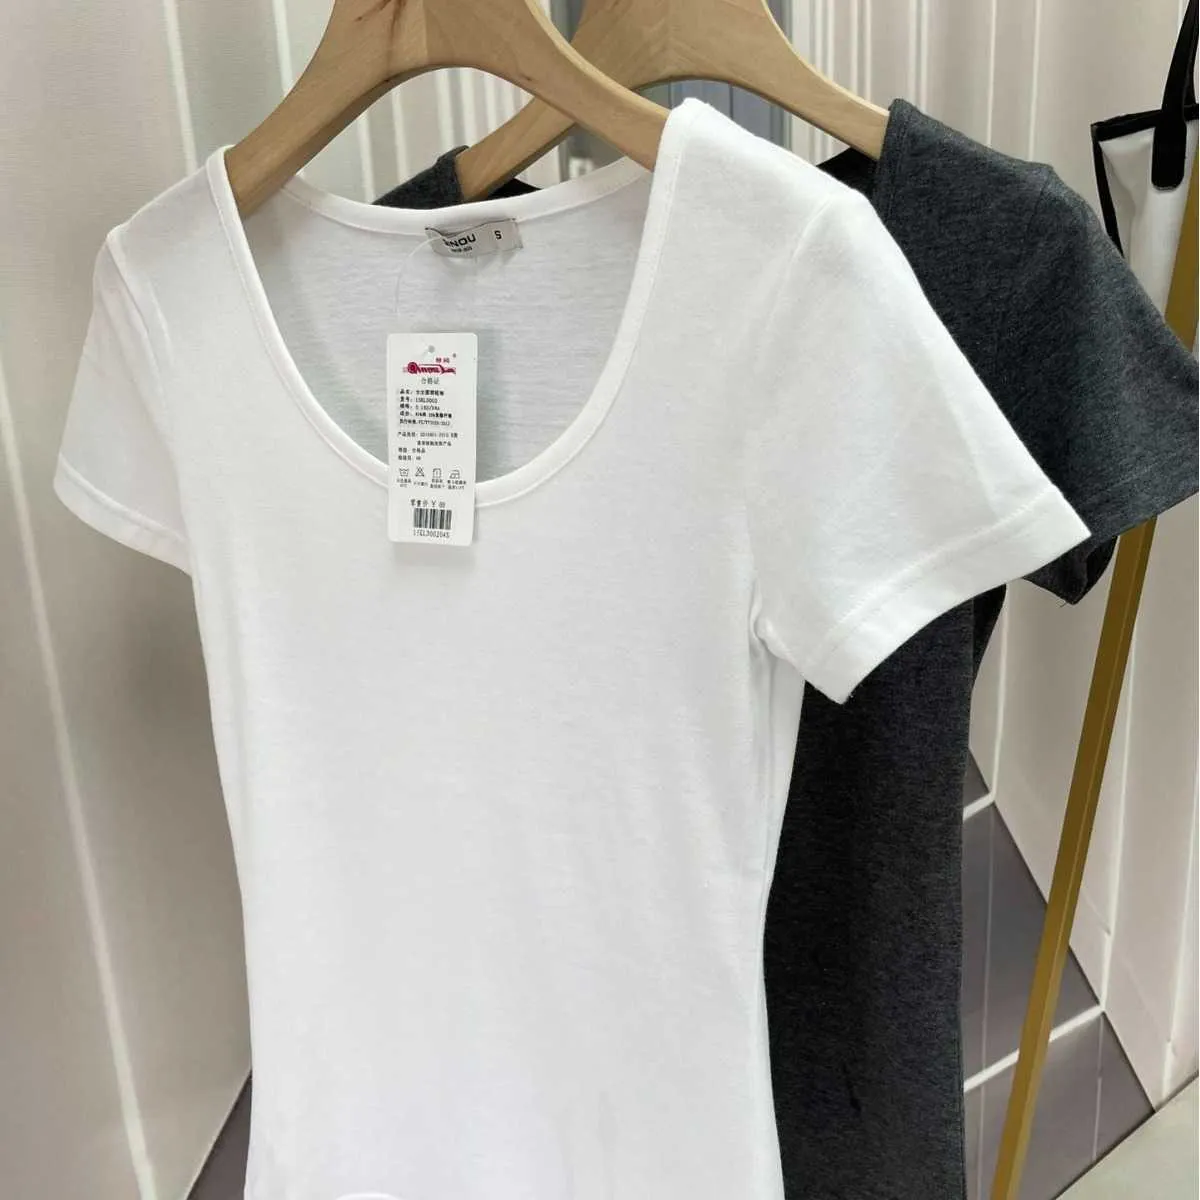 Qinou Summer Womens Pure Cotton T-shirt Short sleeved Solid Color Spicy Girl Big Round Neck Front Shoulder Small White T 15KLD002